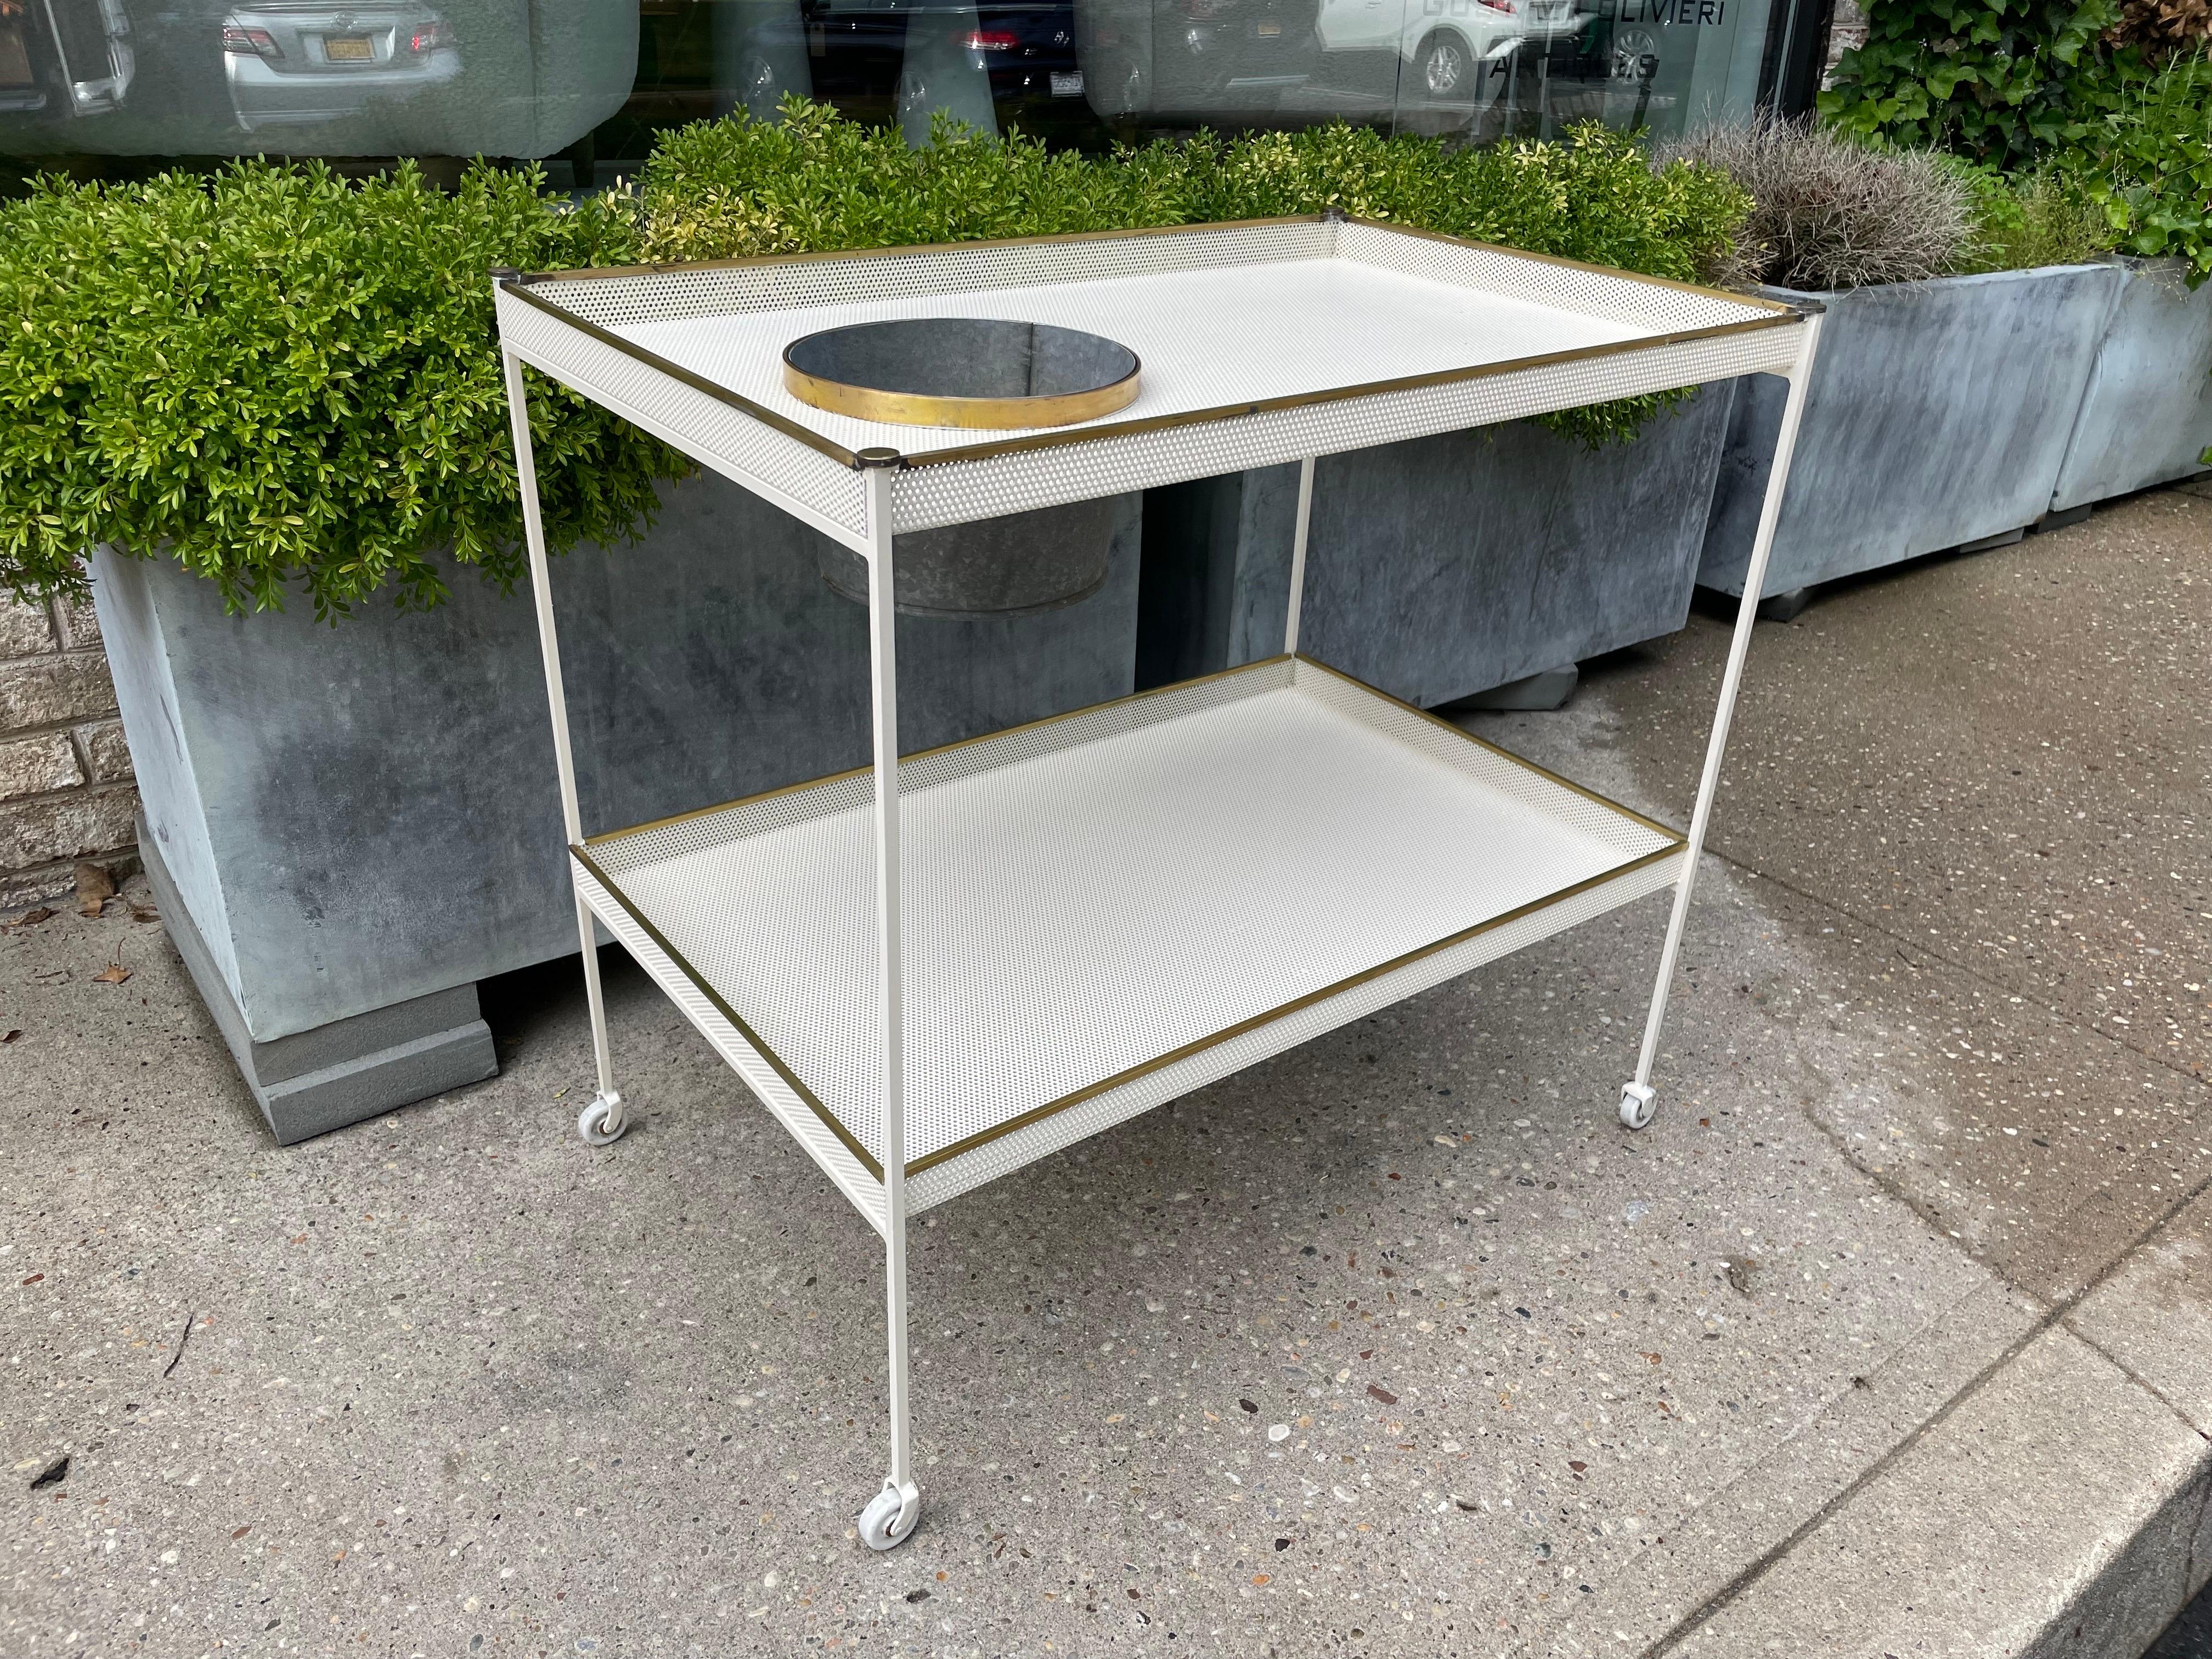 This is a wonderful two-tiered perforated metal in off-white with Porcelain wheels.  Brass accents throughout and a removeable galvanized metal ice bucket for chilling wine or champagne.  Great amount of surface space for entertaining.  Mategot